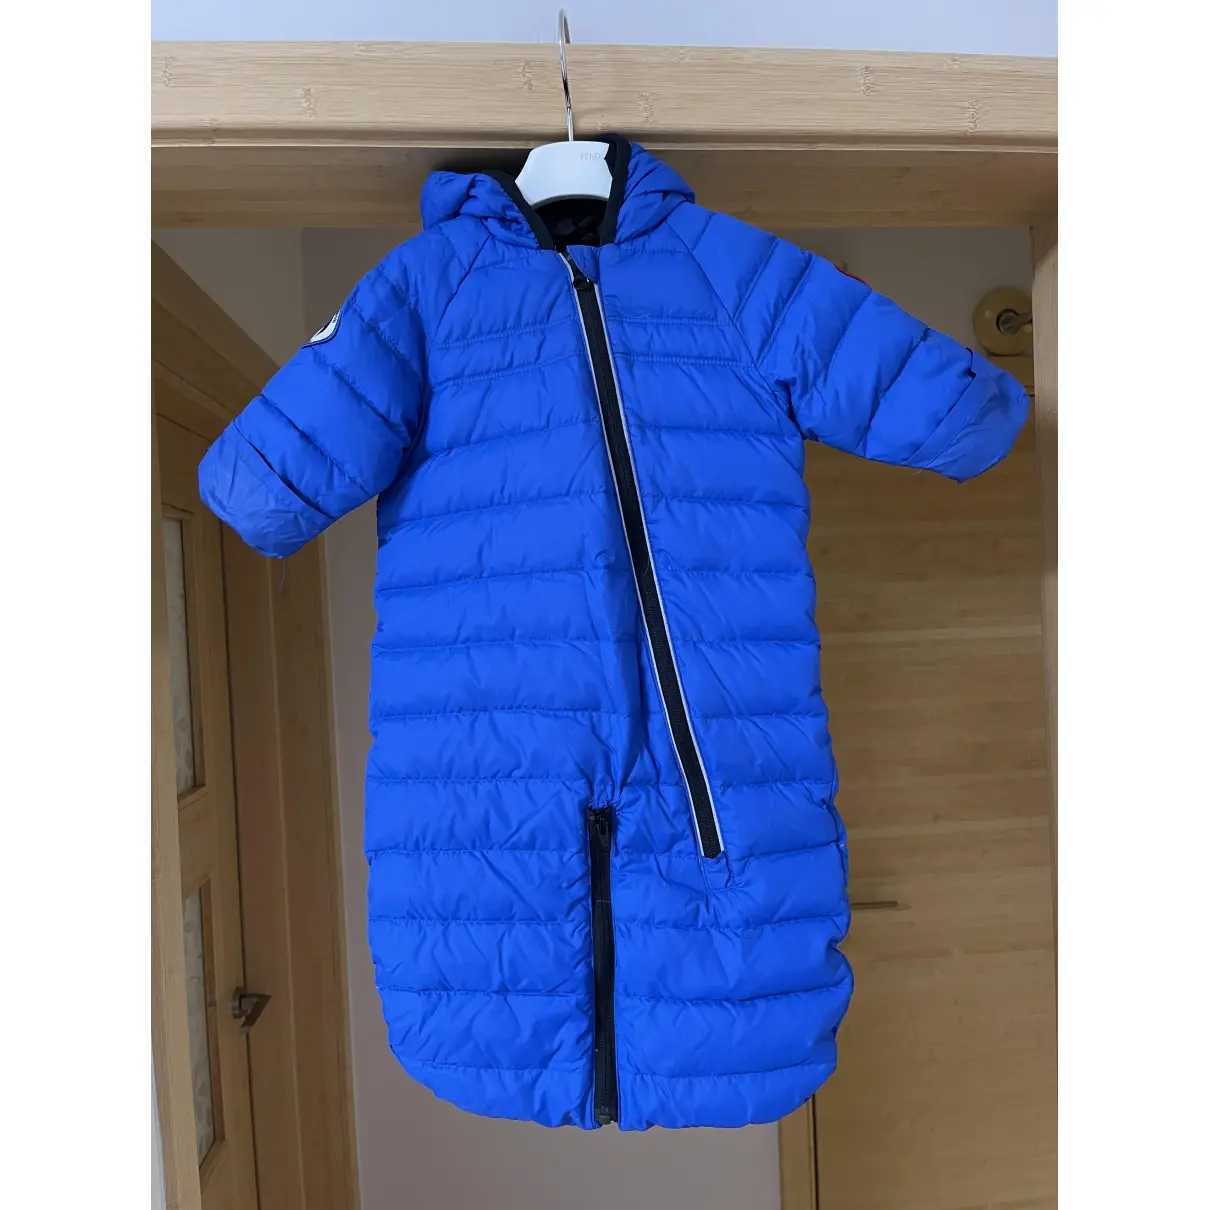 Buy Canada Goose Outfit online